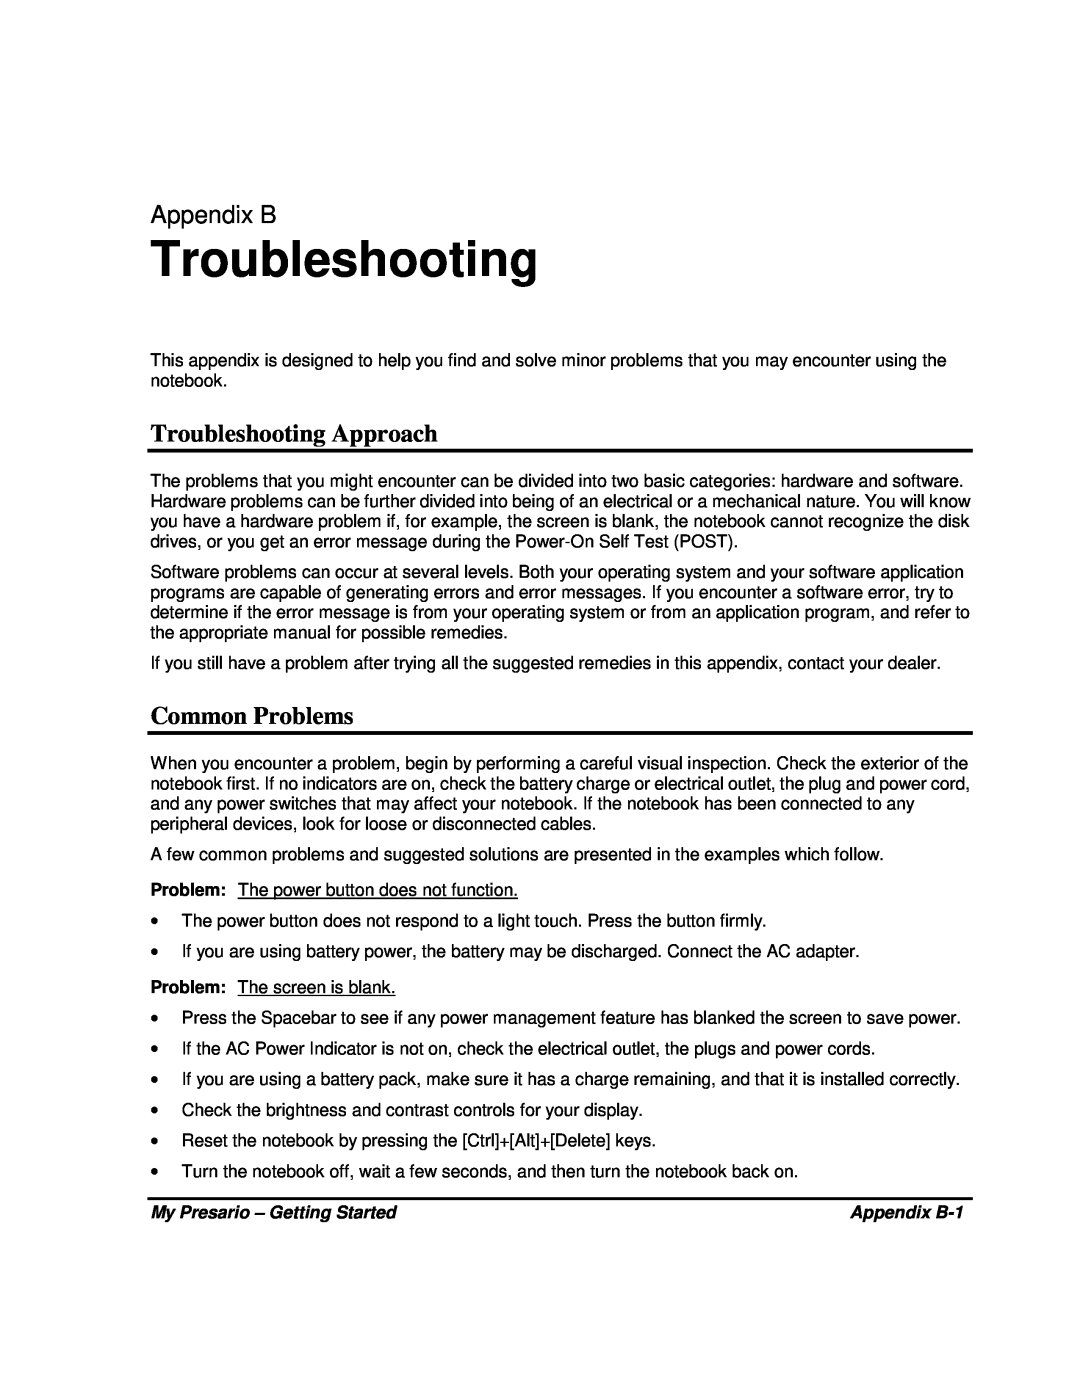 HP 80XL302 manual Troubleshooting Approach, Common Problems, My Presario - Getting Started, Appendix B-1 